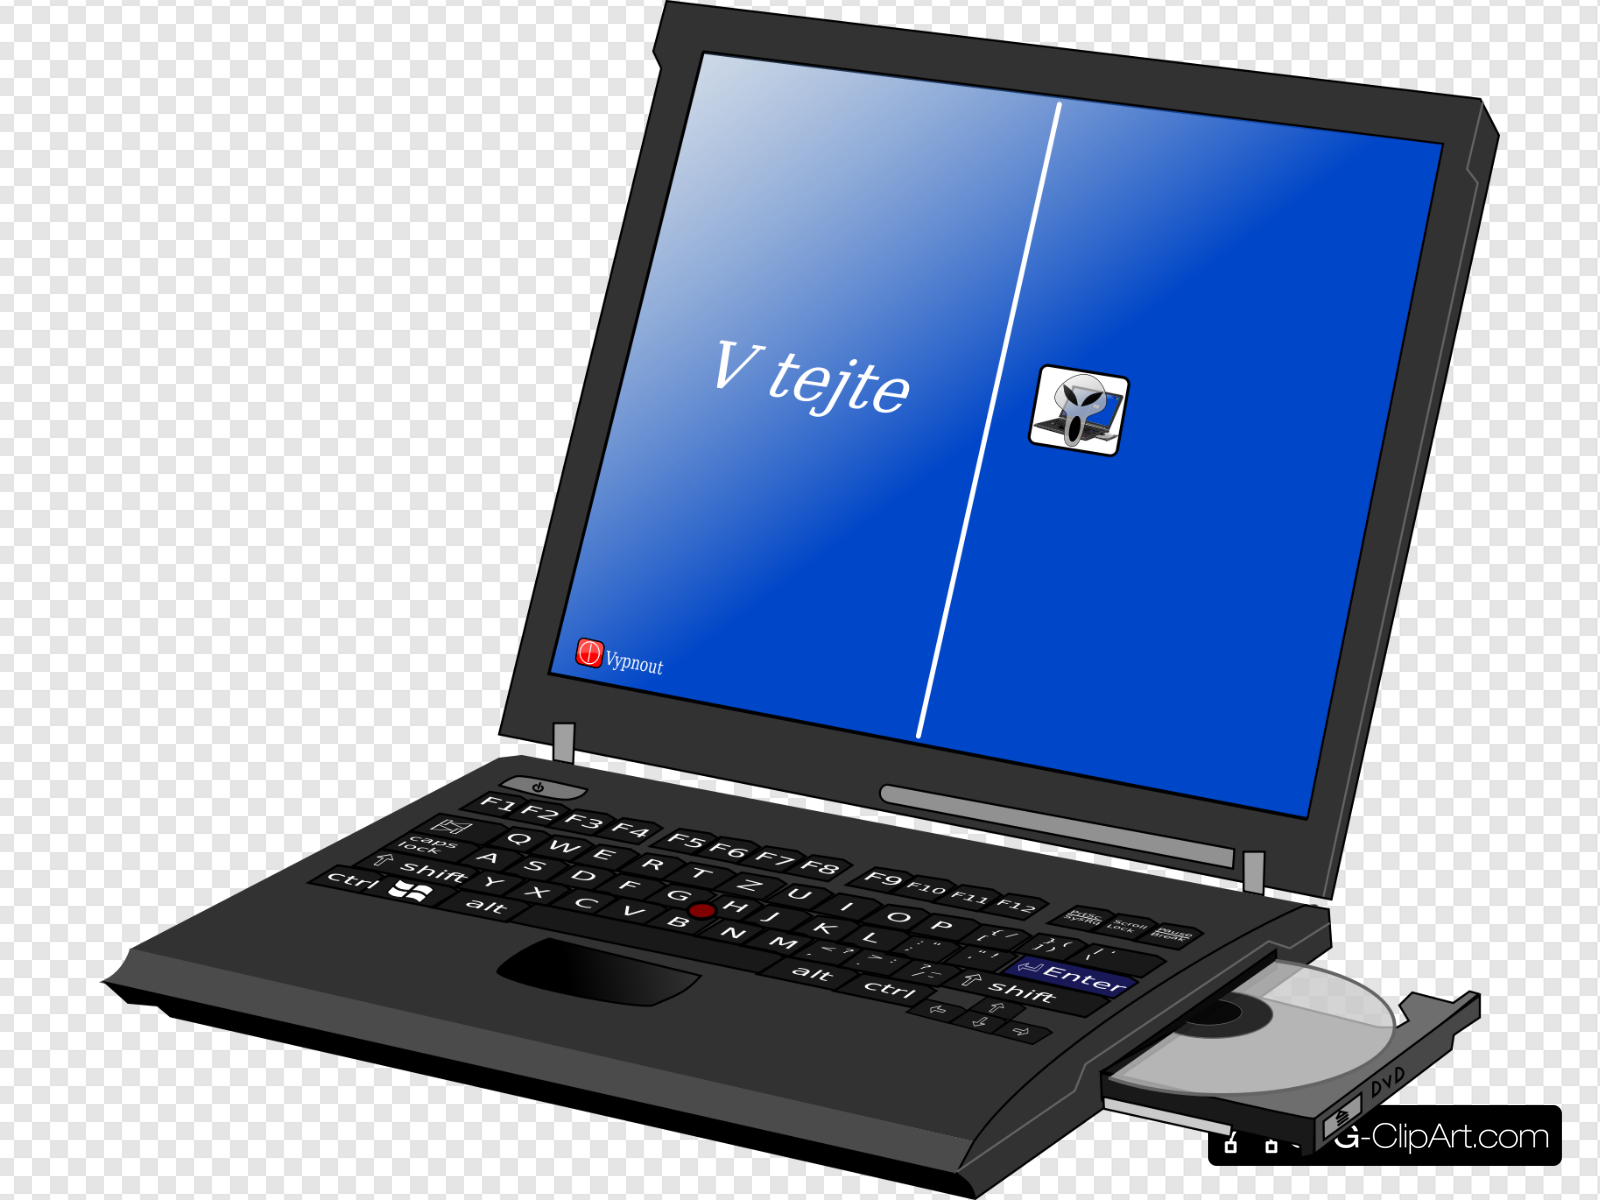 Laptop With Blue Screen Clip art, Icon and SVG.